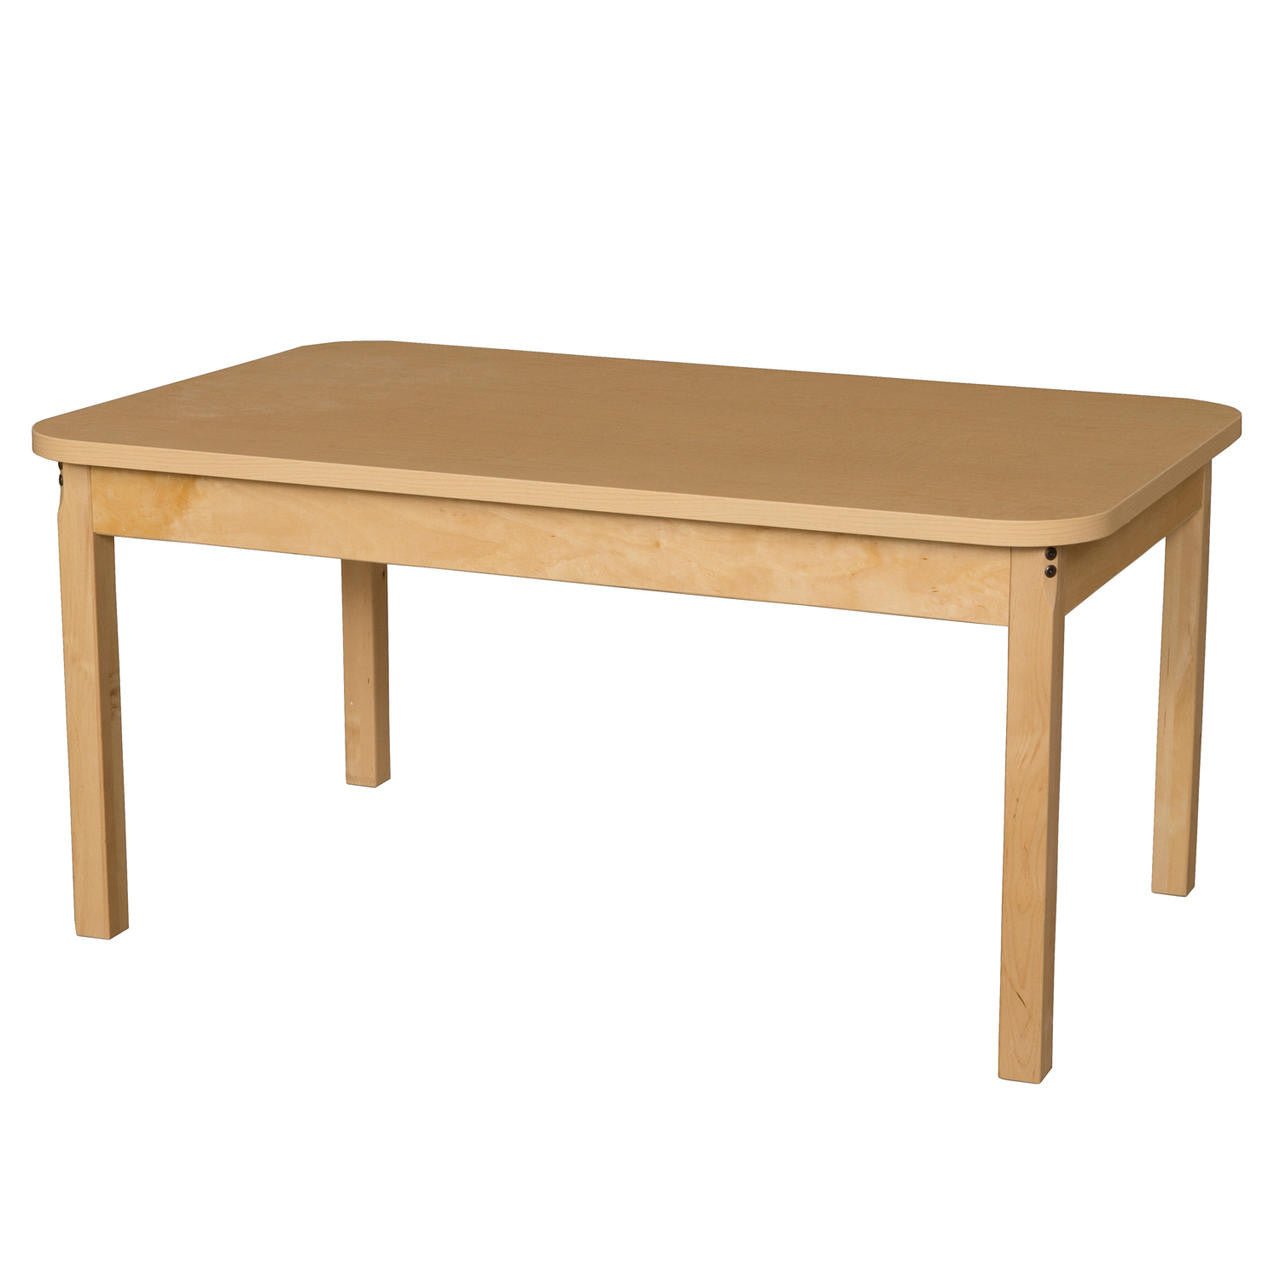 Rectangle High Pressure Laminate Table with Hardwood Legs- 20